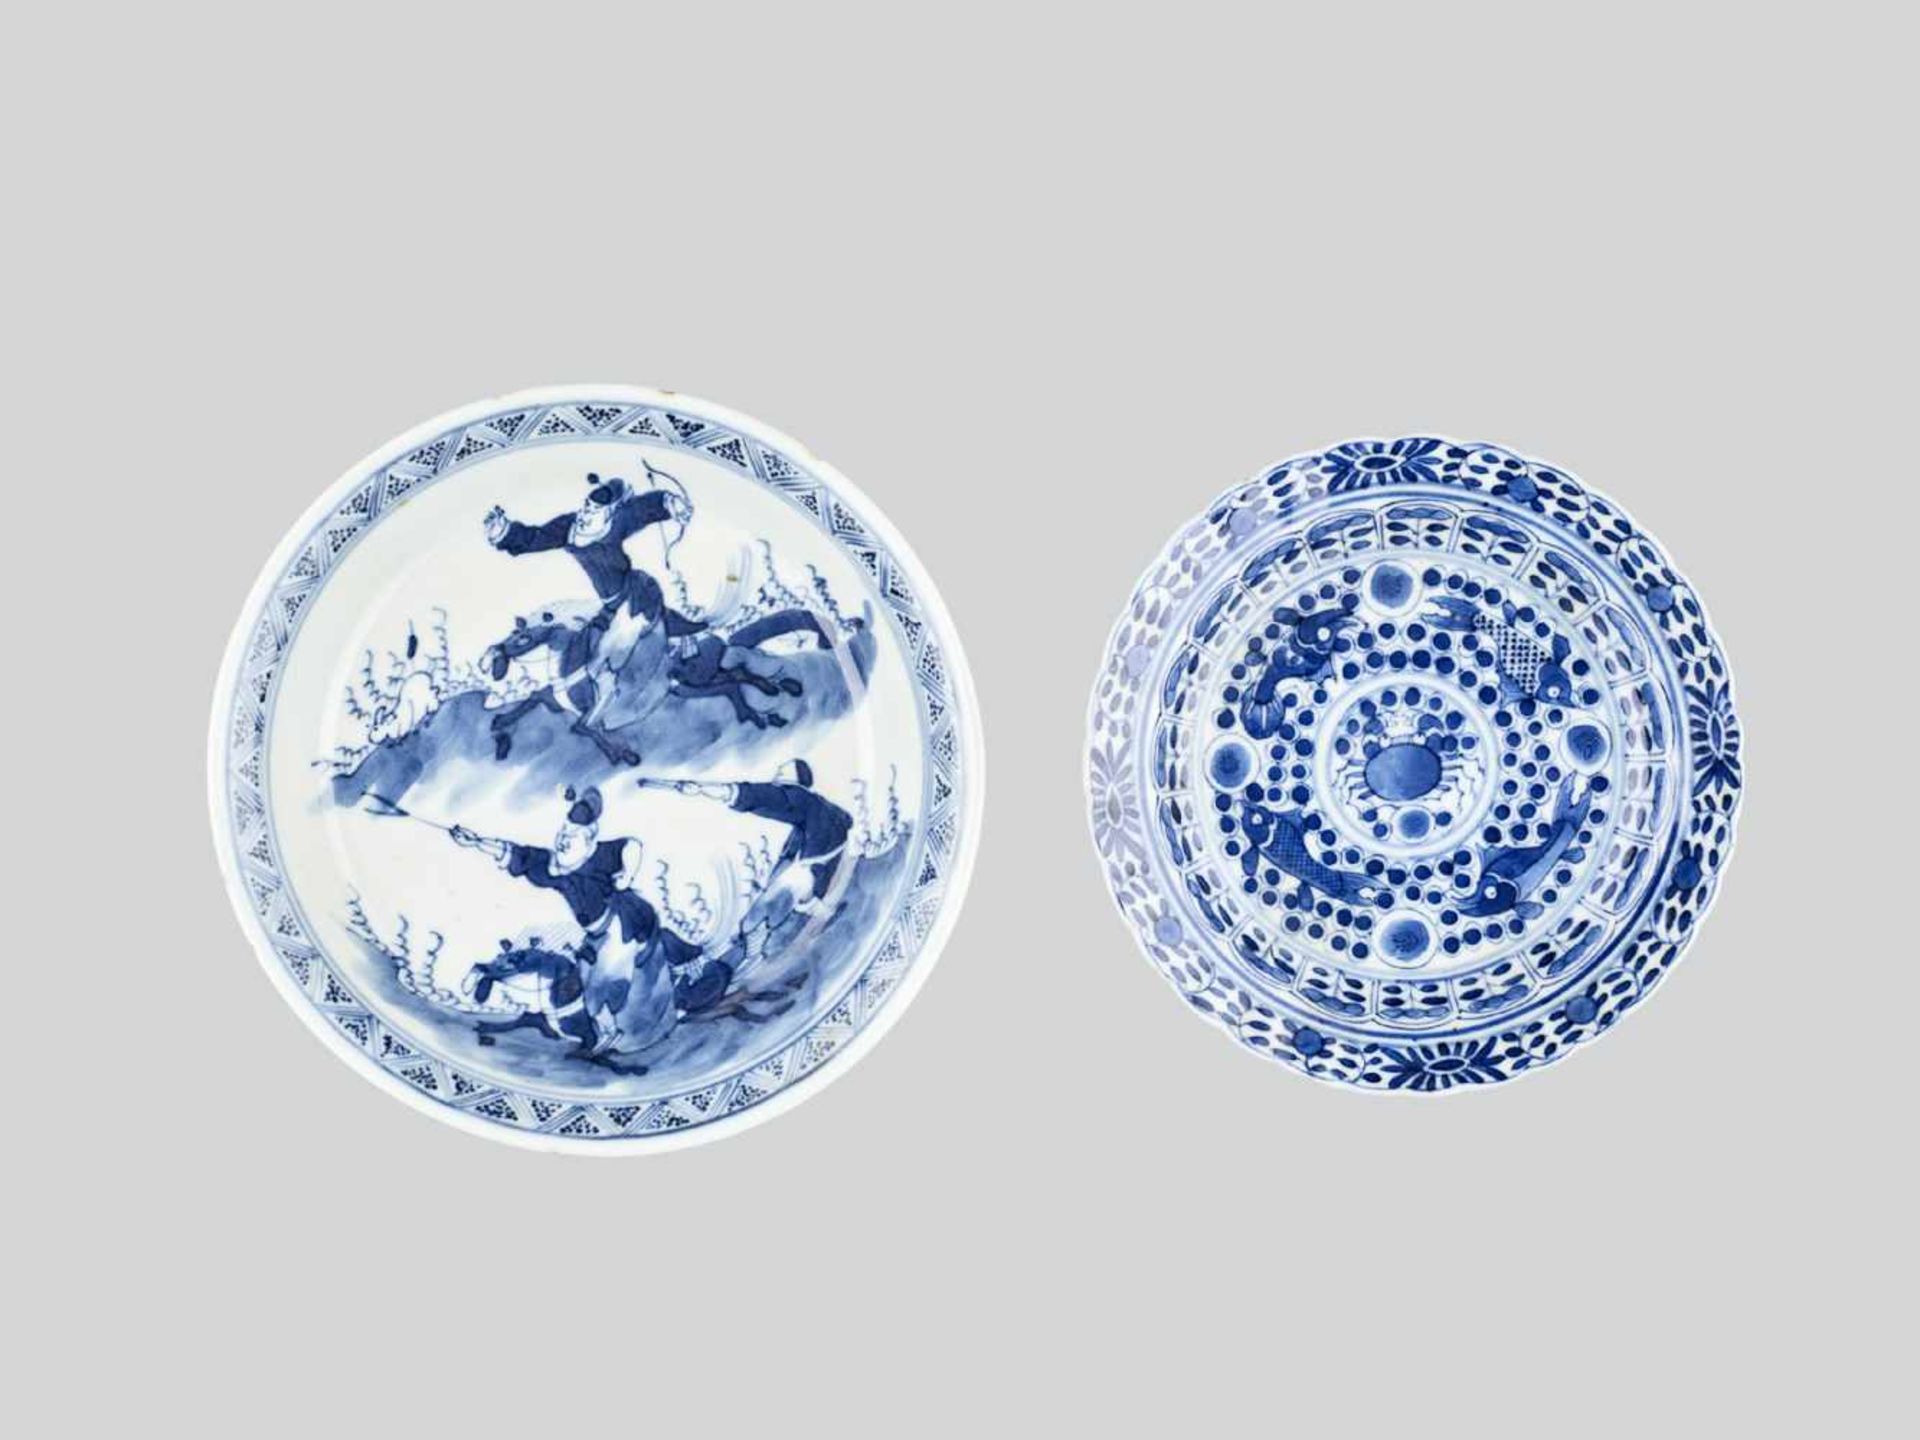 TWO SMALL BLUE AND WHITE GLAZED PORCELAIN DISHES, KANGXI MARK AND PERIOD